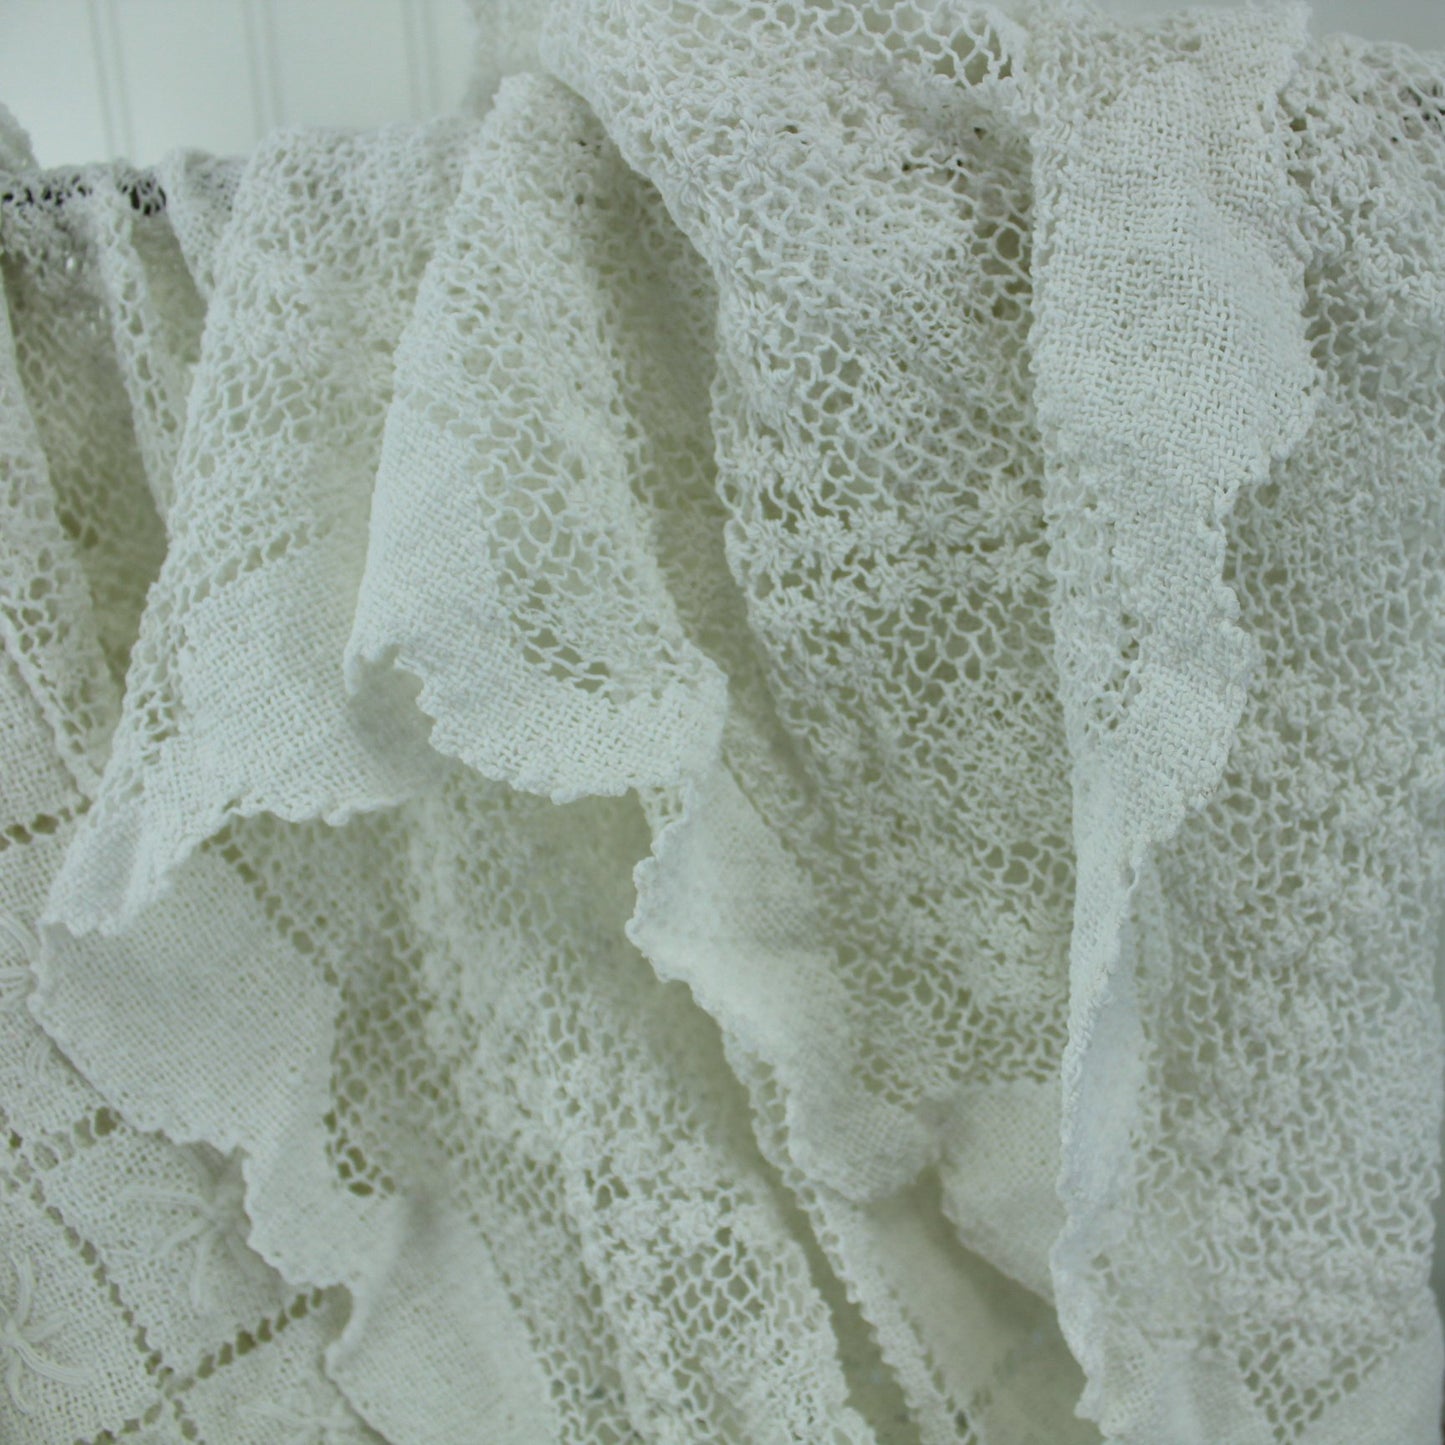 Older 1940s 50s Lace White Table Cloth Elegant Hevy Vraiety Weave 75" X 90" closeup stitch variety